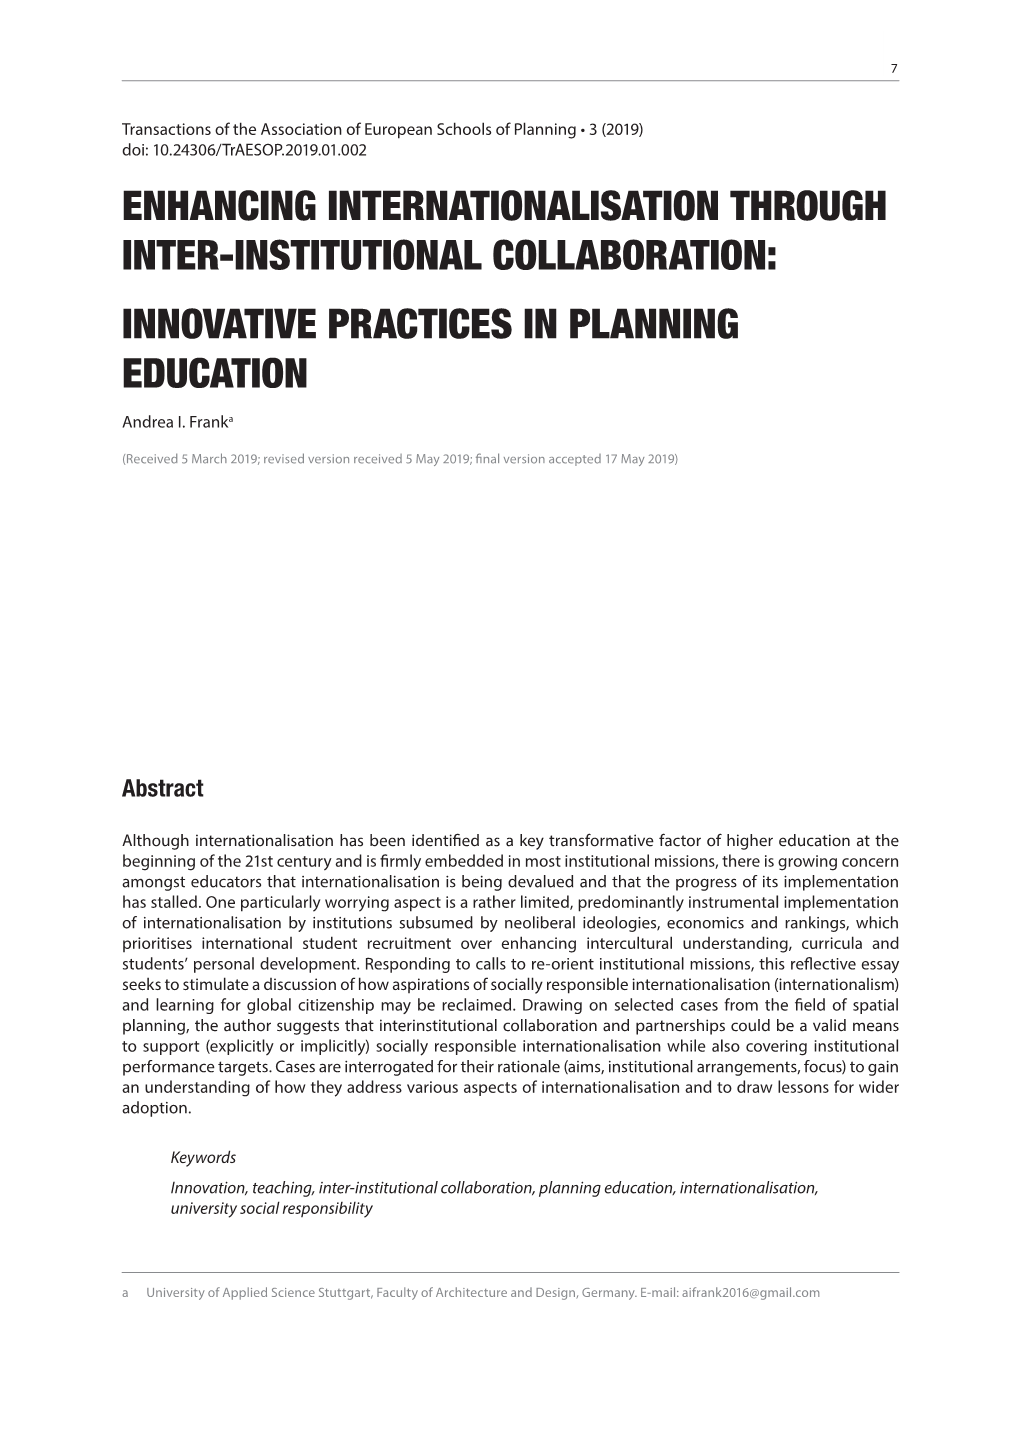 Enhancing Internationalisation Through Inter-Institutional Collaboration: Innovative Practices in Planning Education